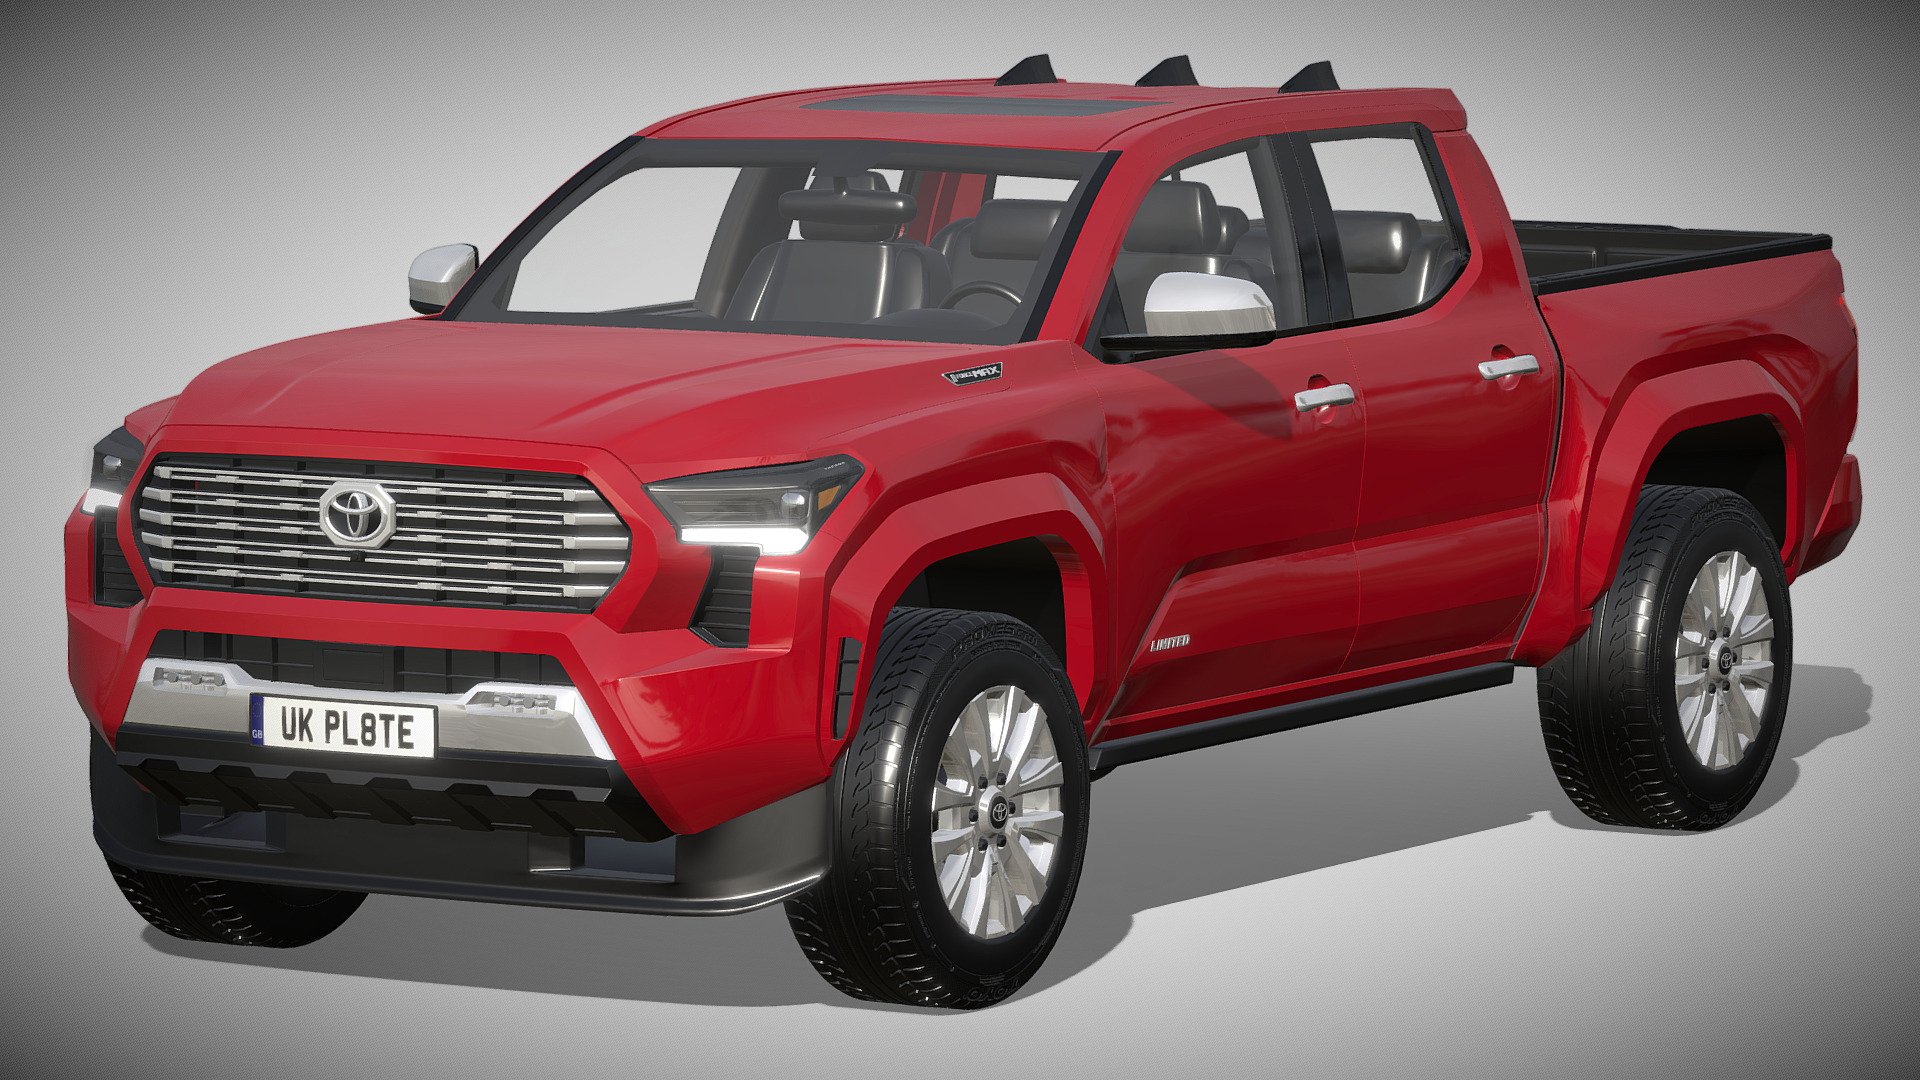 Toyota Tacoma 2024

https://www.toyota.com/upcoming-vehicles/tacoma/

Clean geometry Light weight model, yet completely detailed for HI-Res renders. Use for movies, Advertisements or games

Corona render and materials

All textures include in *.rar files

Lighting setup is not included in the file! - Toyota Tacoma 2024 - Buy Royalty Free 3D model by zifir3d 3d model